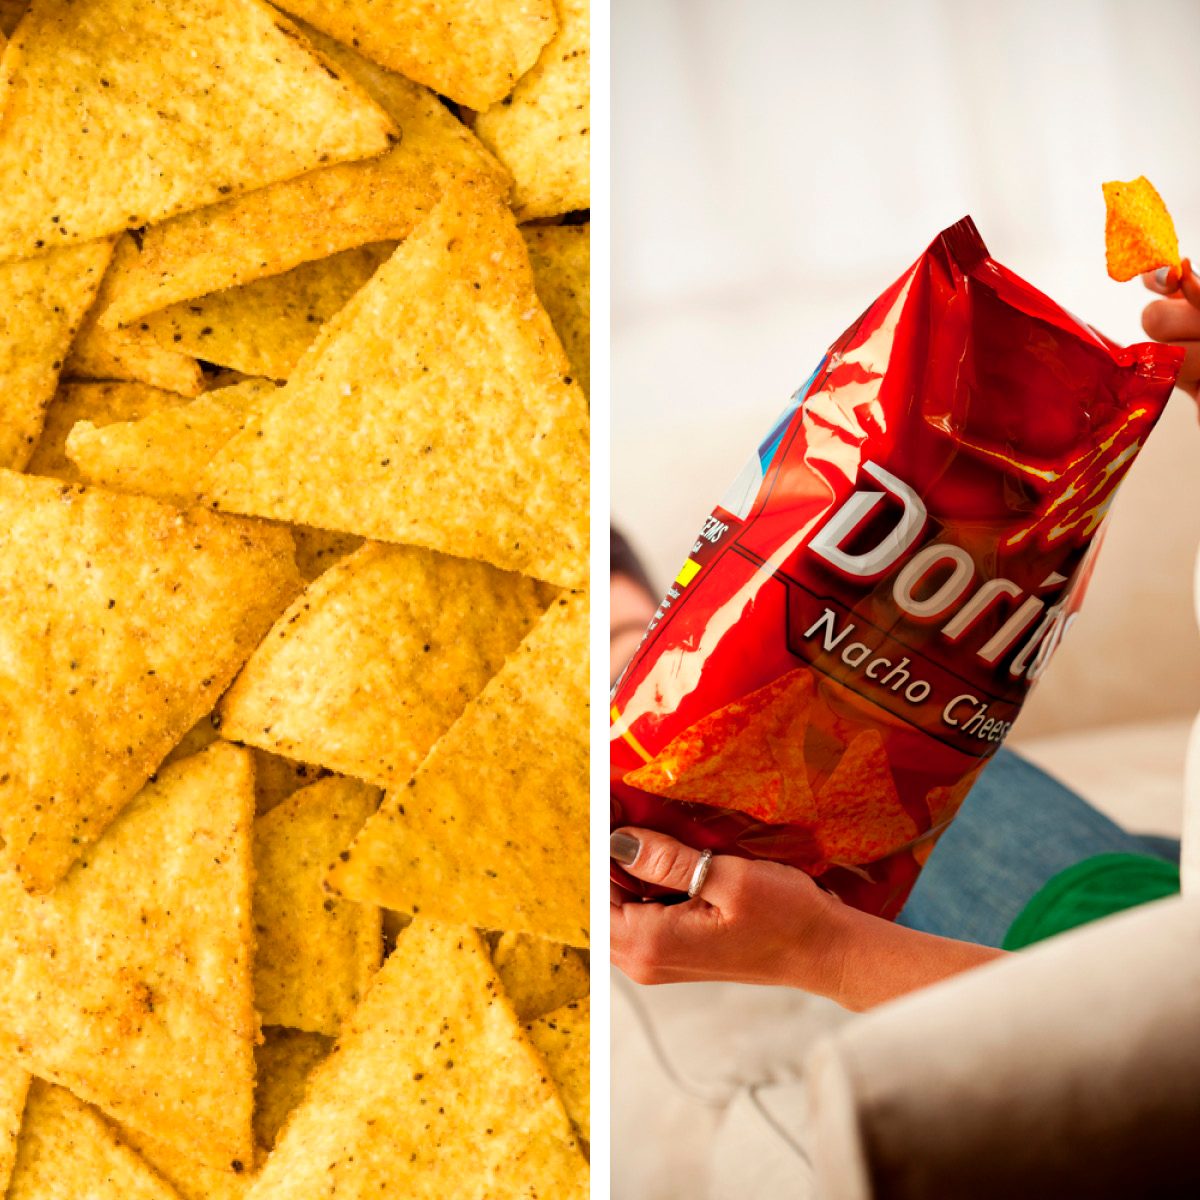 Things You Didn’t Know About Doritos | Reader's Digest